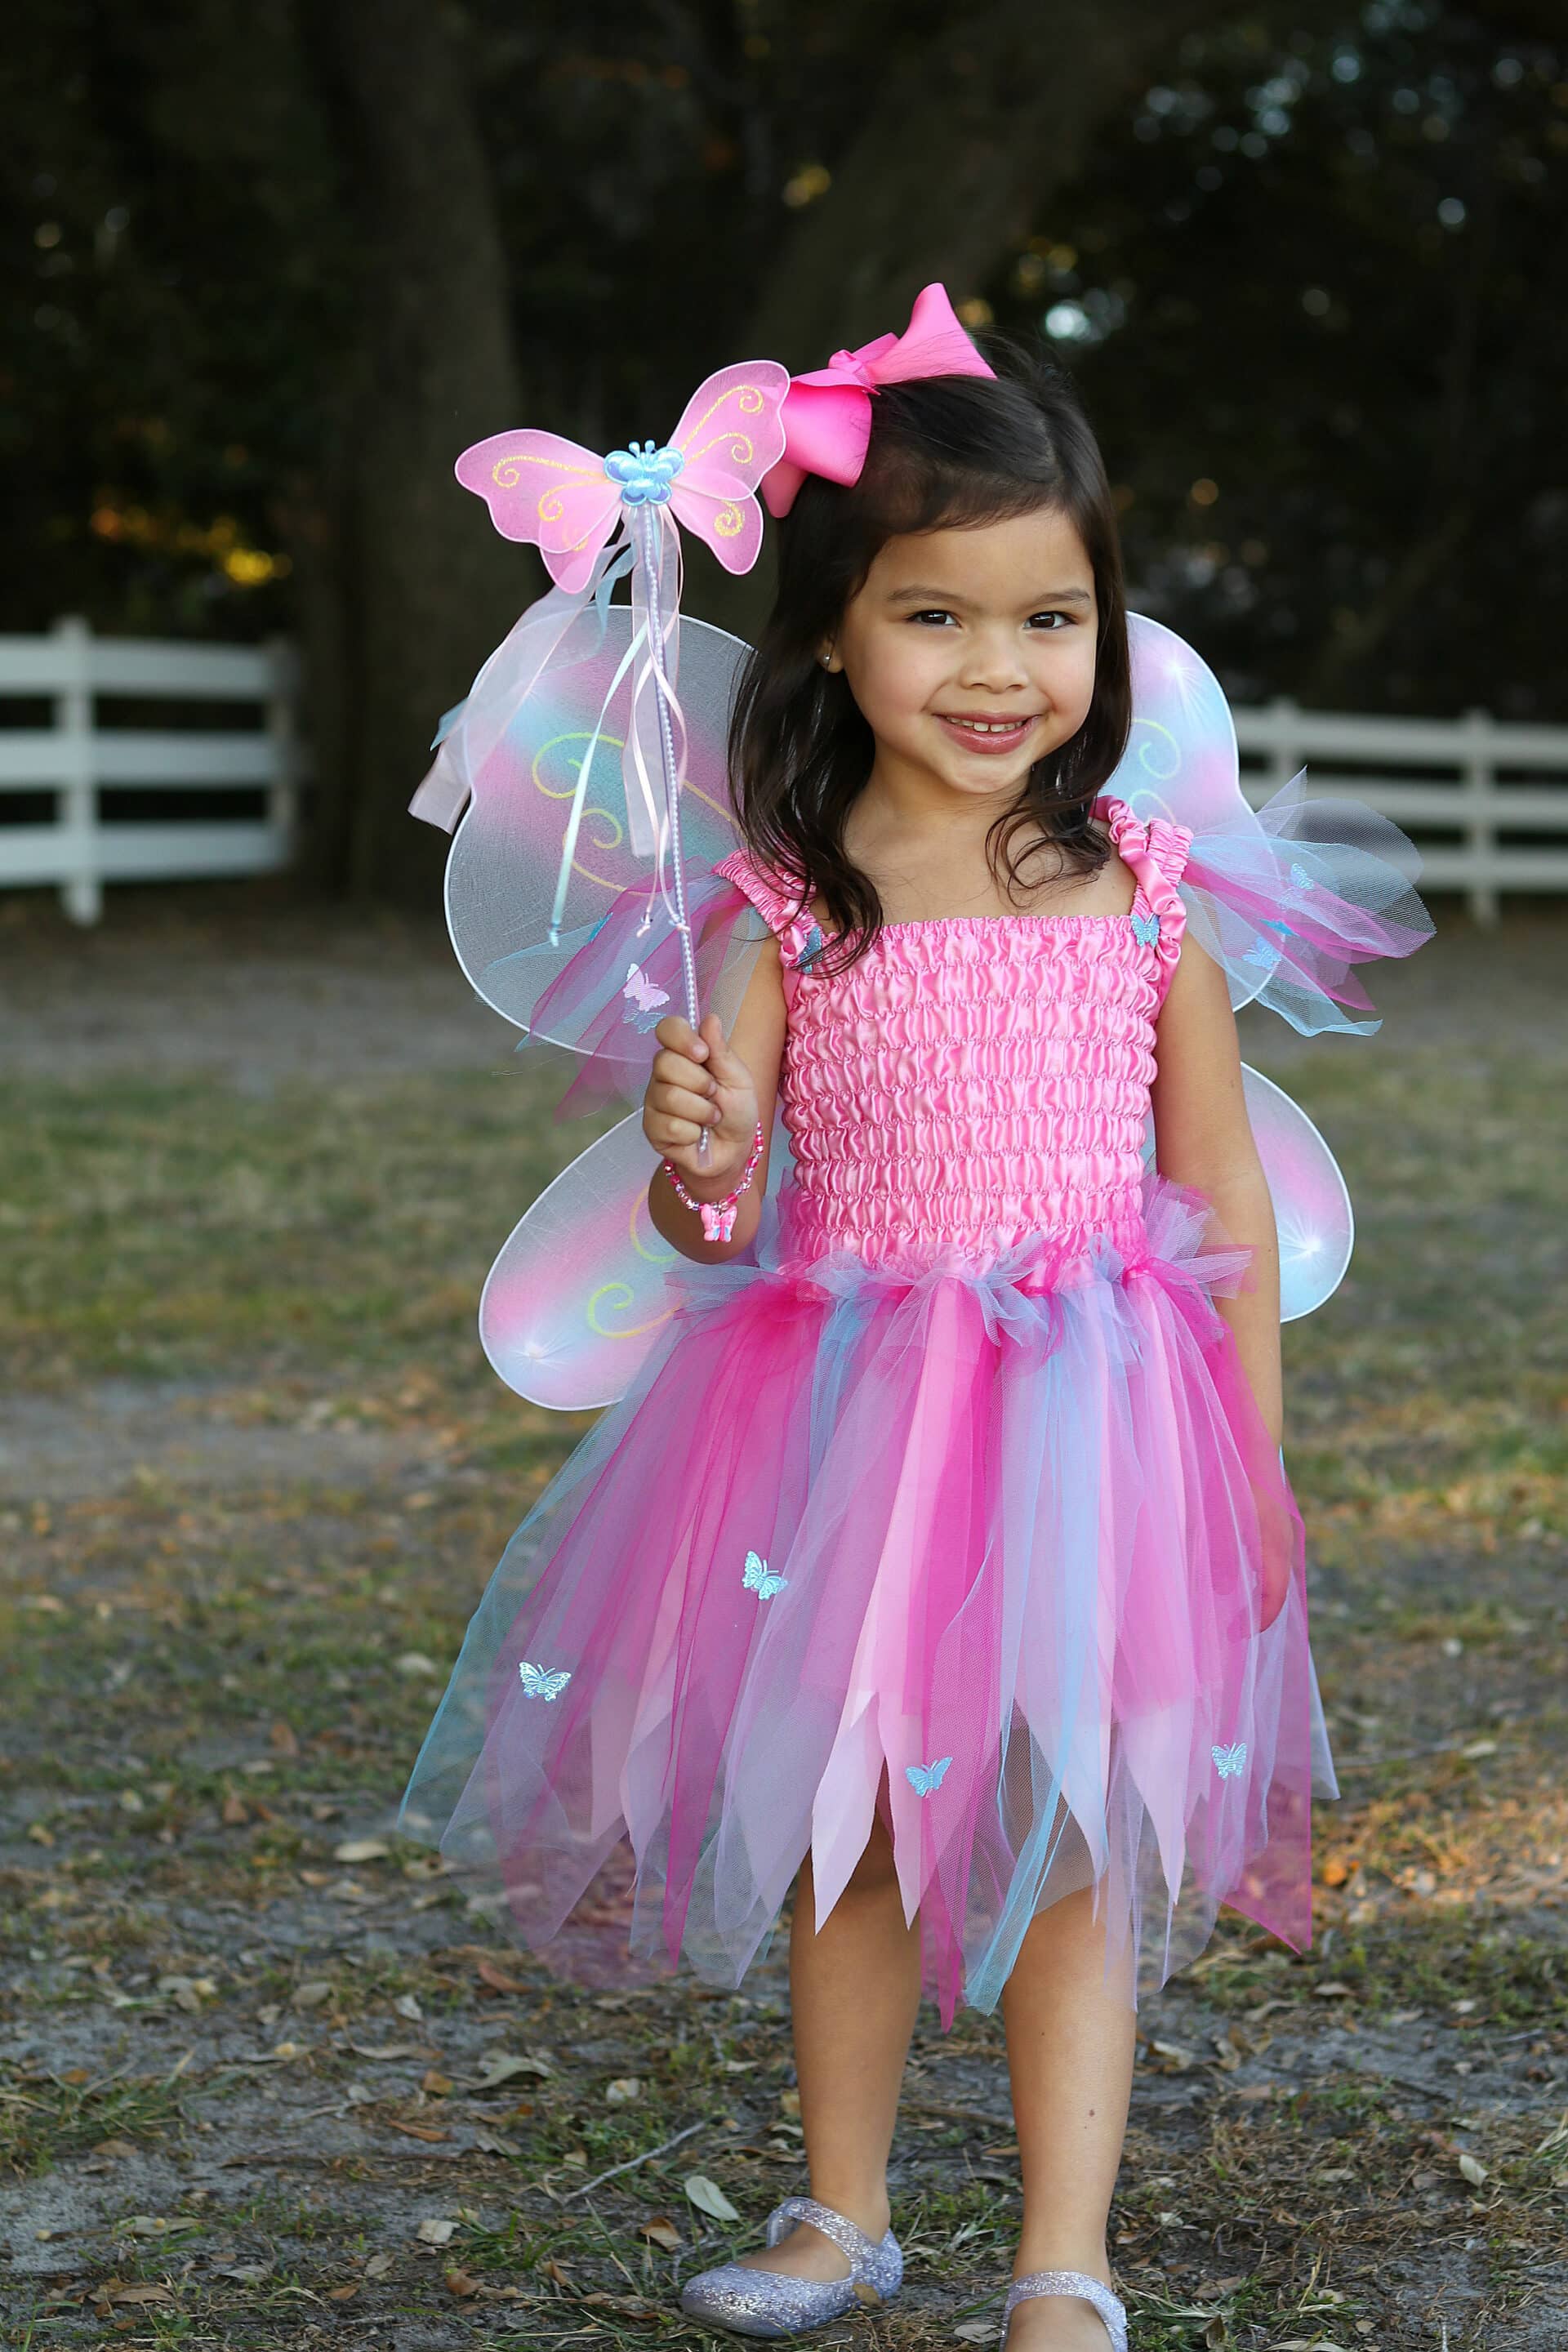 Butterfly Princess Little Babys Birthday Party Dresses Jewel Neck Tulle Kids  Prom Gown For Wedding Puffy Skirt First Communion Dress FS01 From  Fashiondsuit2019 9283  DHgateCom